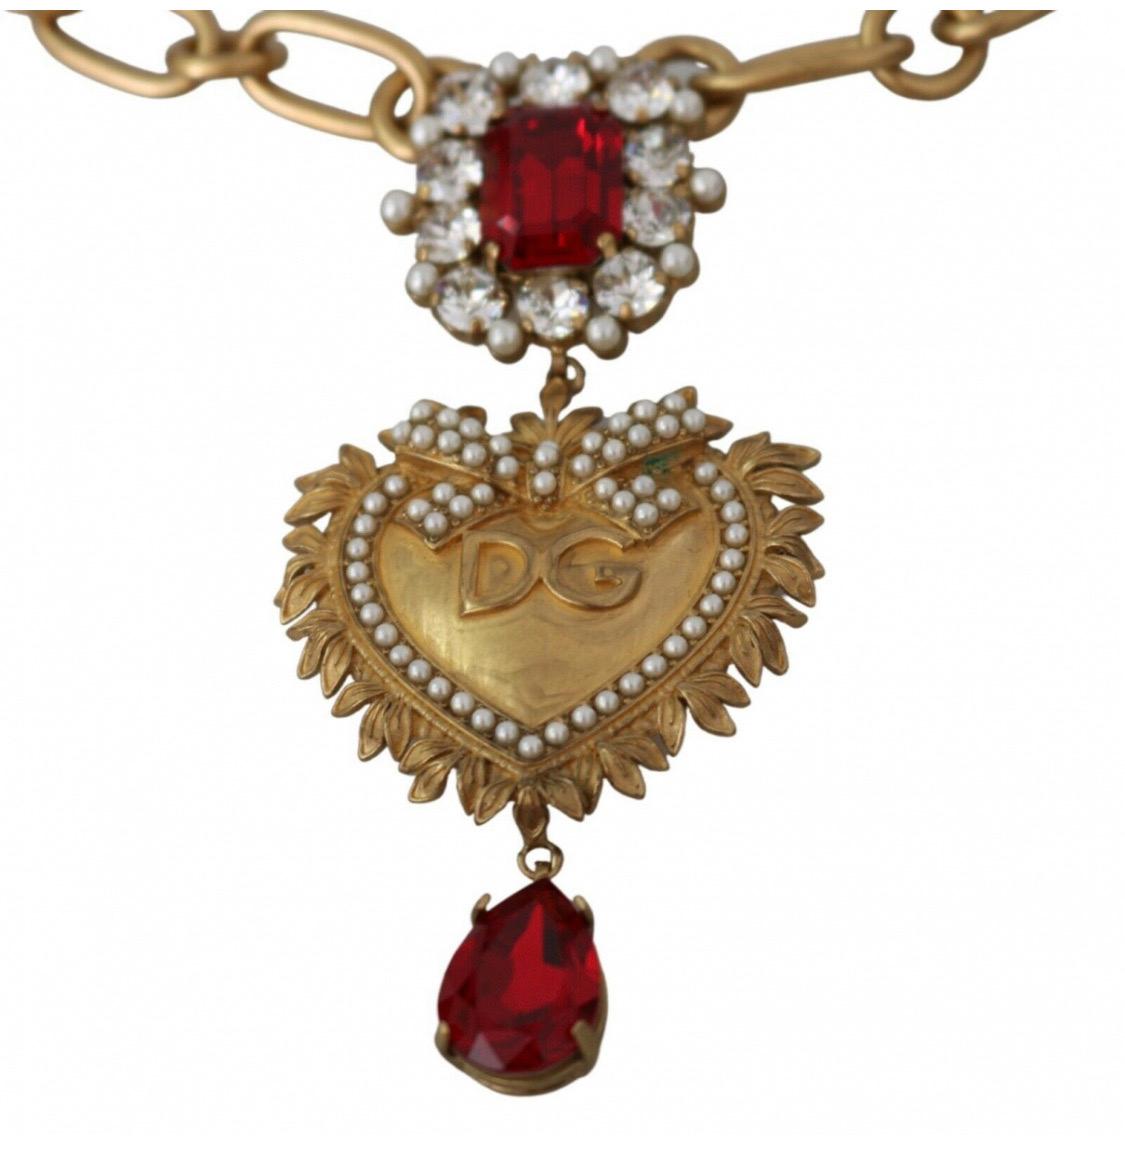 Modern Dolce & Gabbana sacred heart pearl pendant
necklace with red crystals